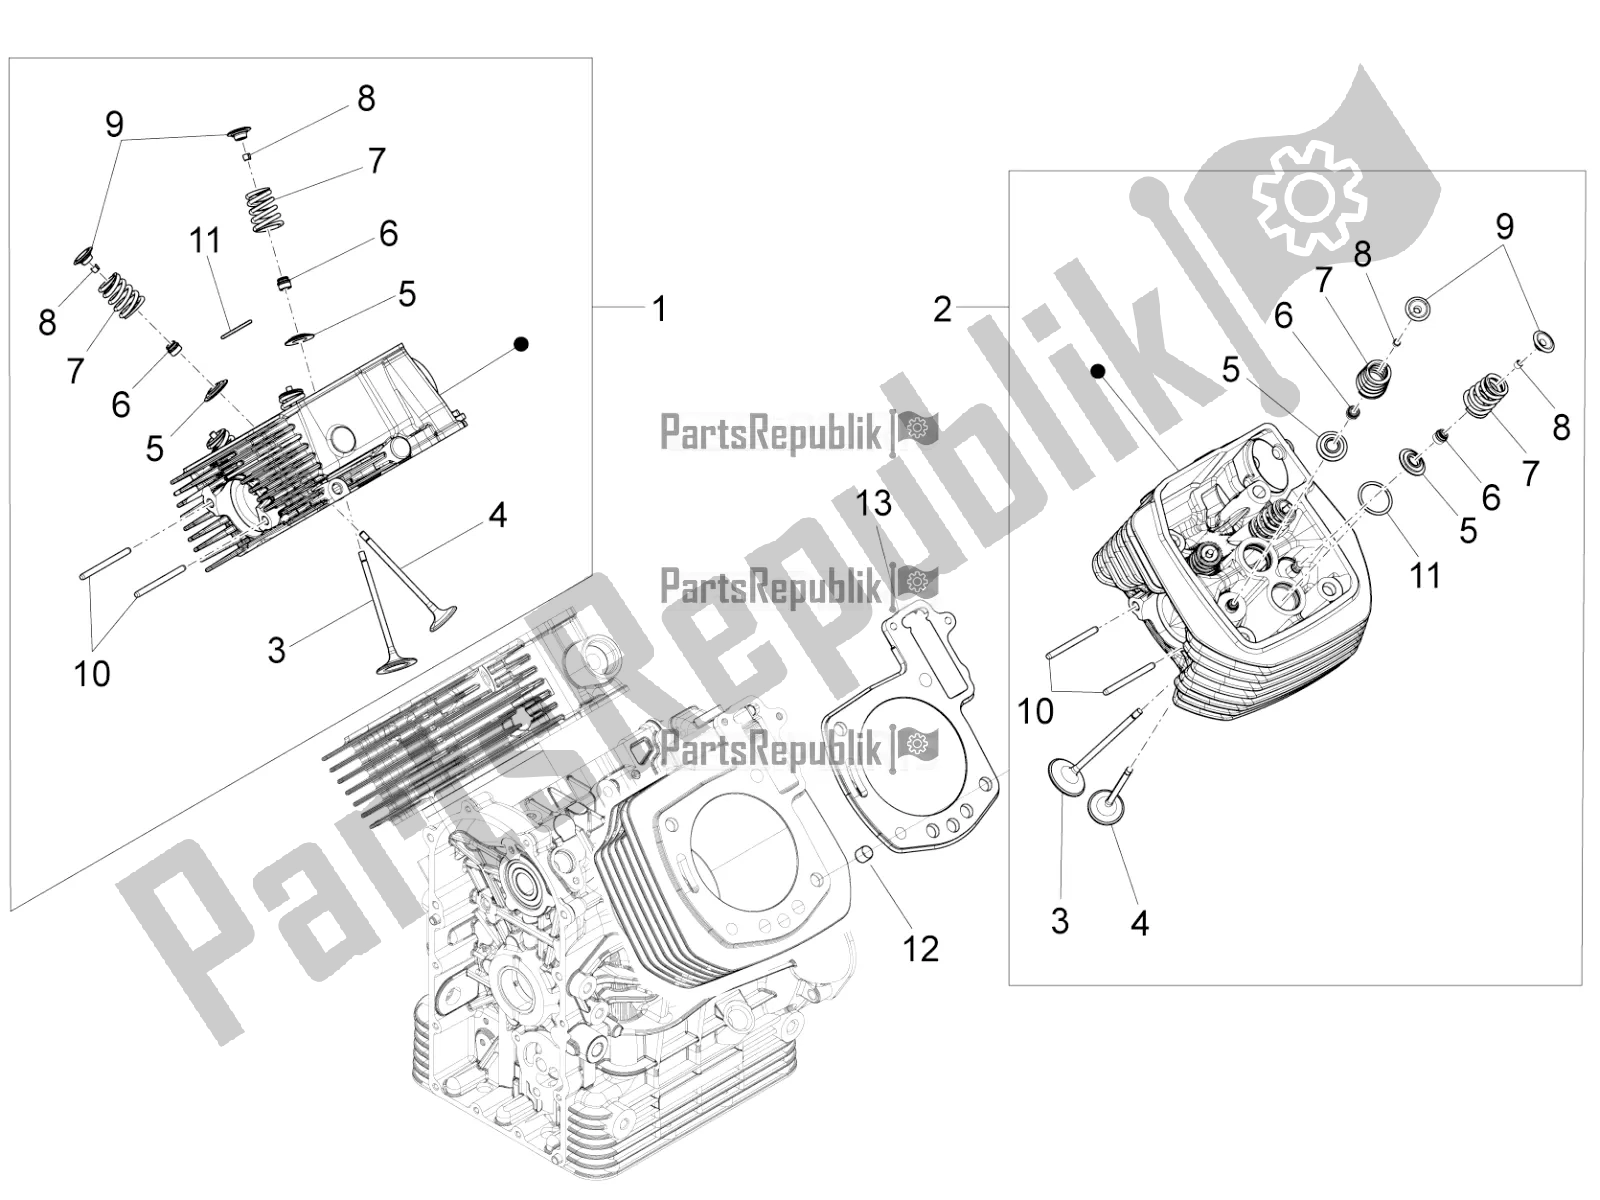 All parts for the Cylinder Head - Valves of the Moto-Guzzi Audace 1400 ABS 2017